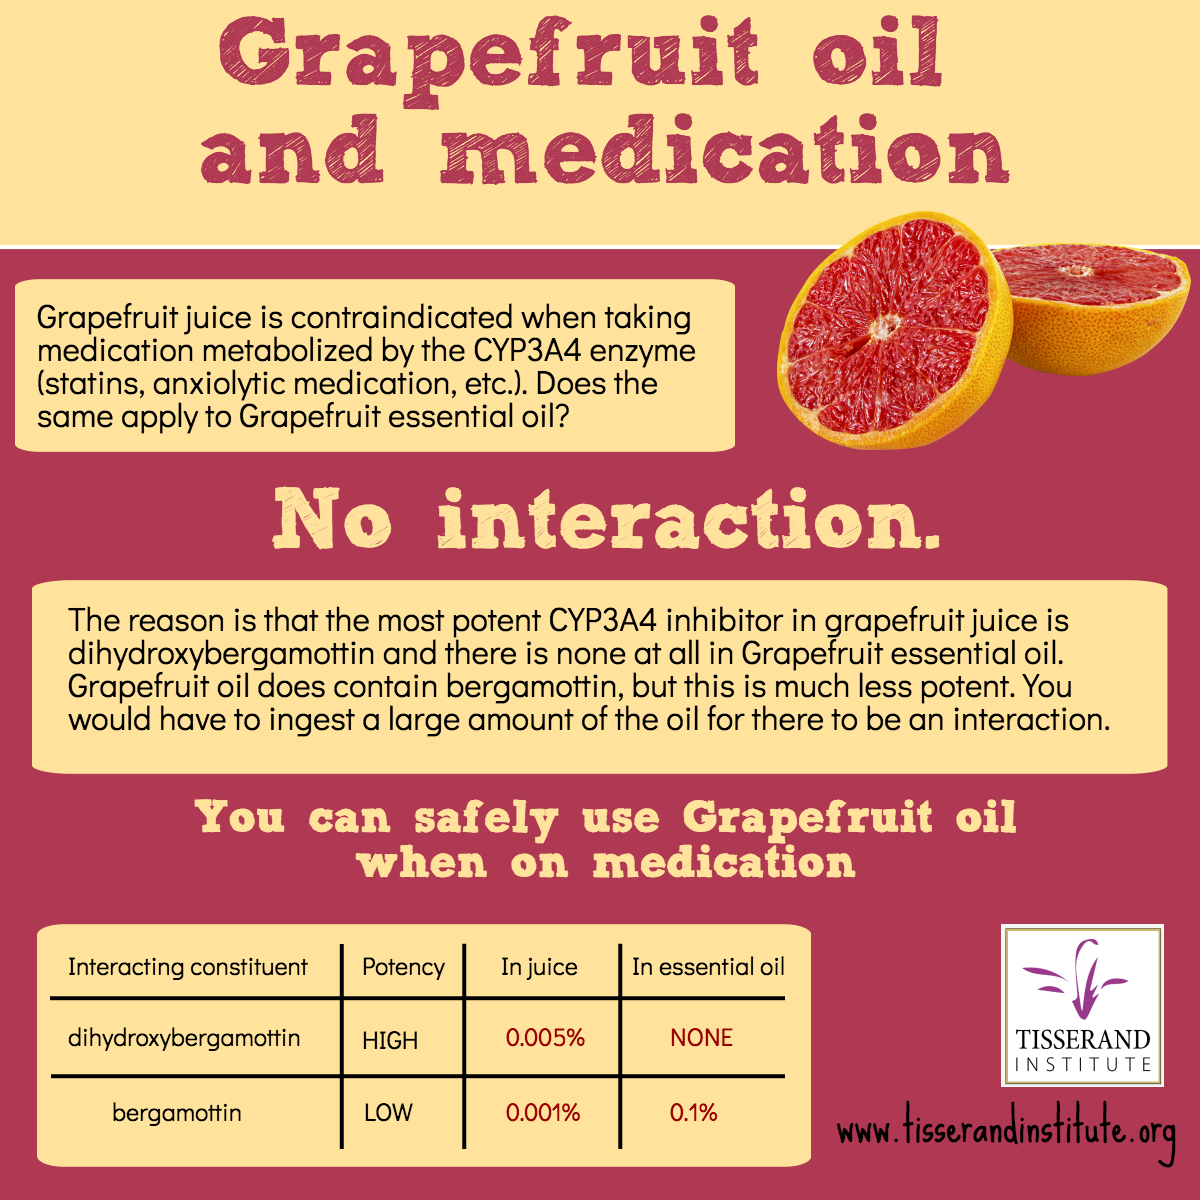 Grapefruit oil and medication